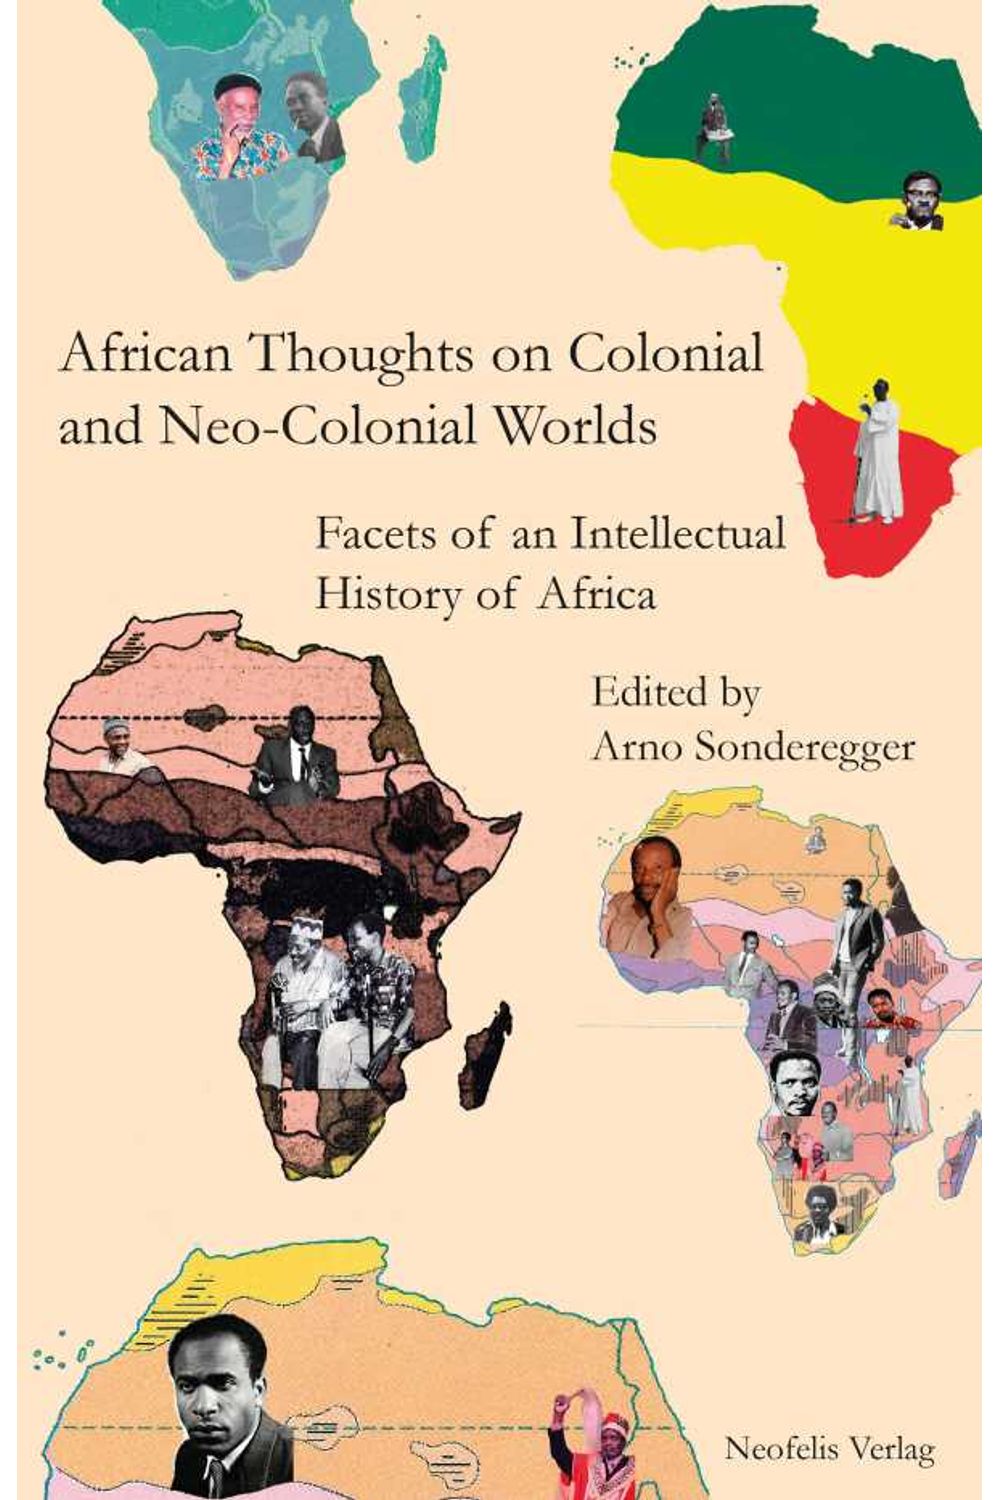 bw-african-thoughts-on-colonial-and-neocolonial-worlds-neofelis-verlag-9783958080836